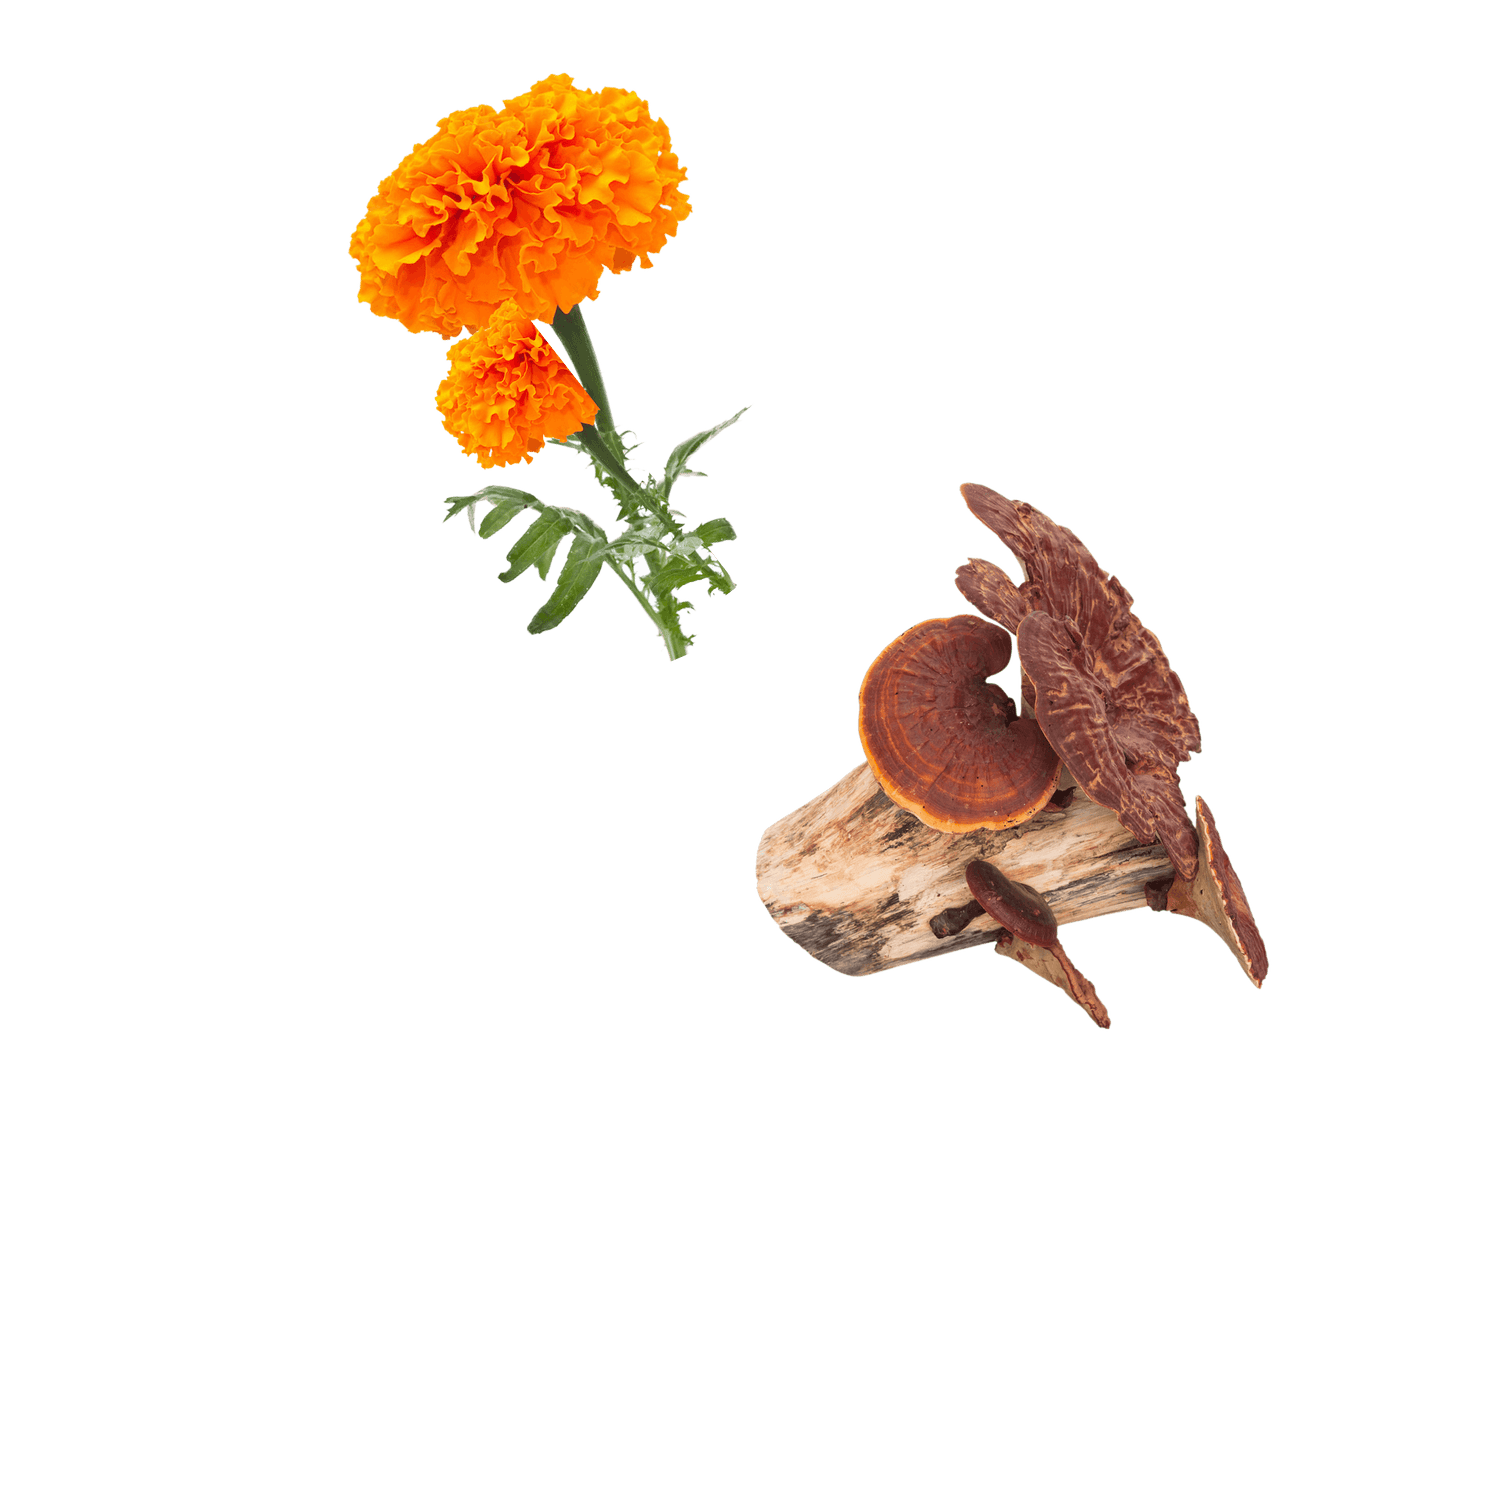 Marigold flowers and reishi mushrooms on a white background